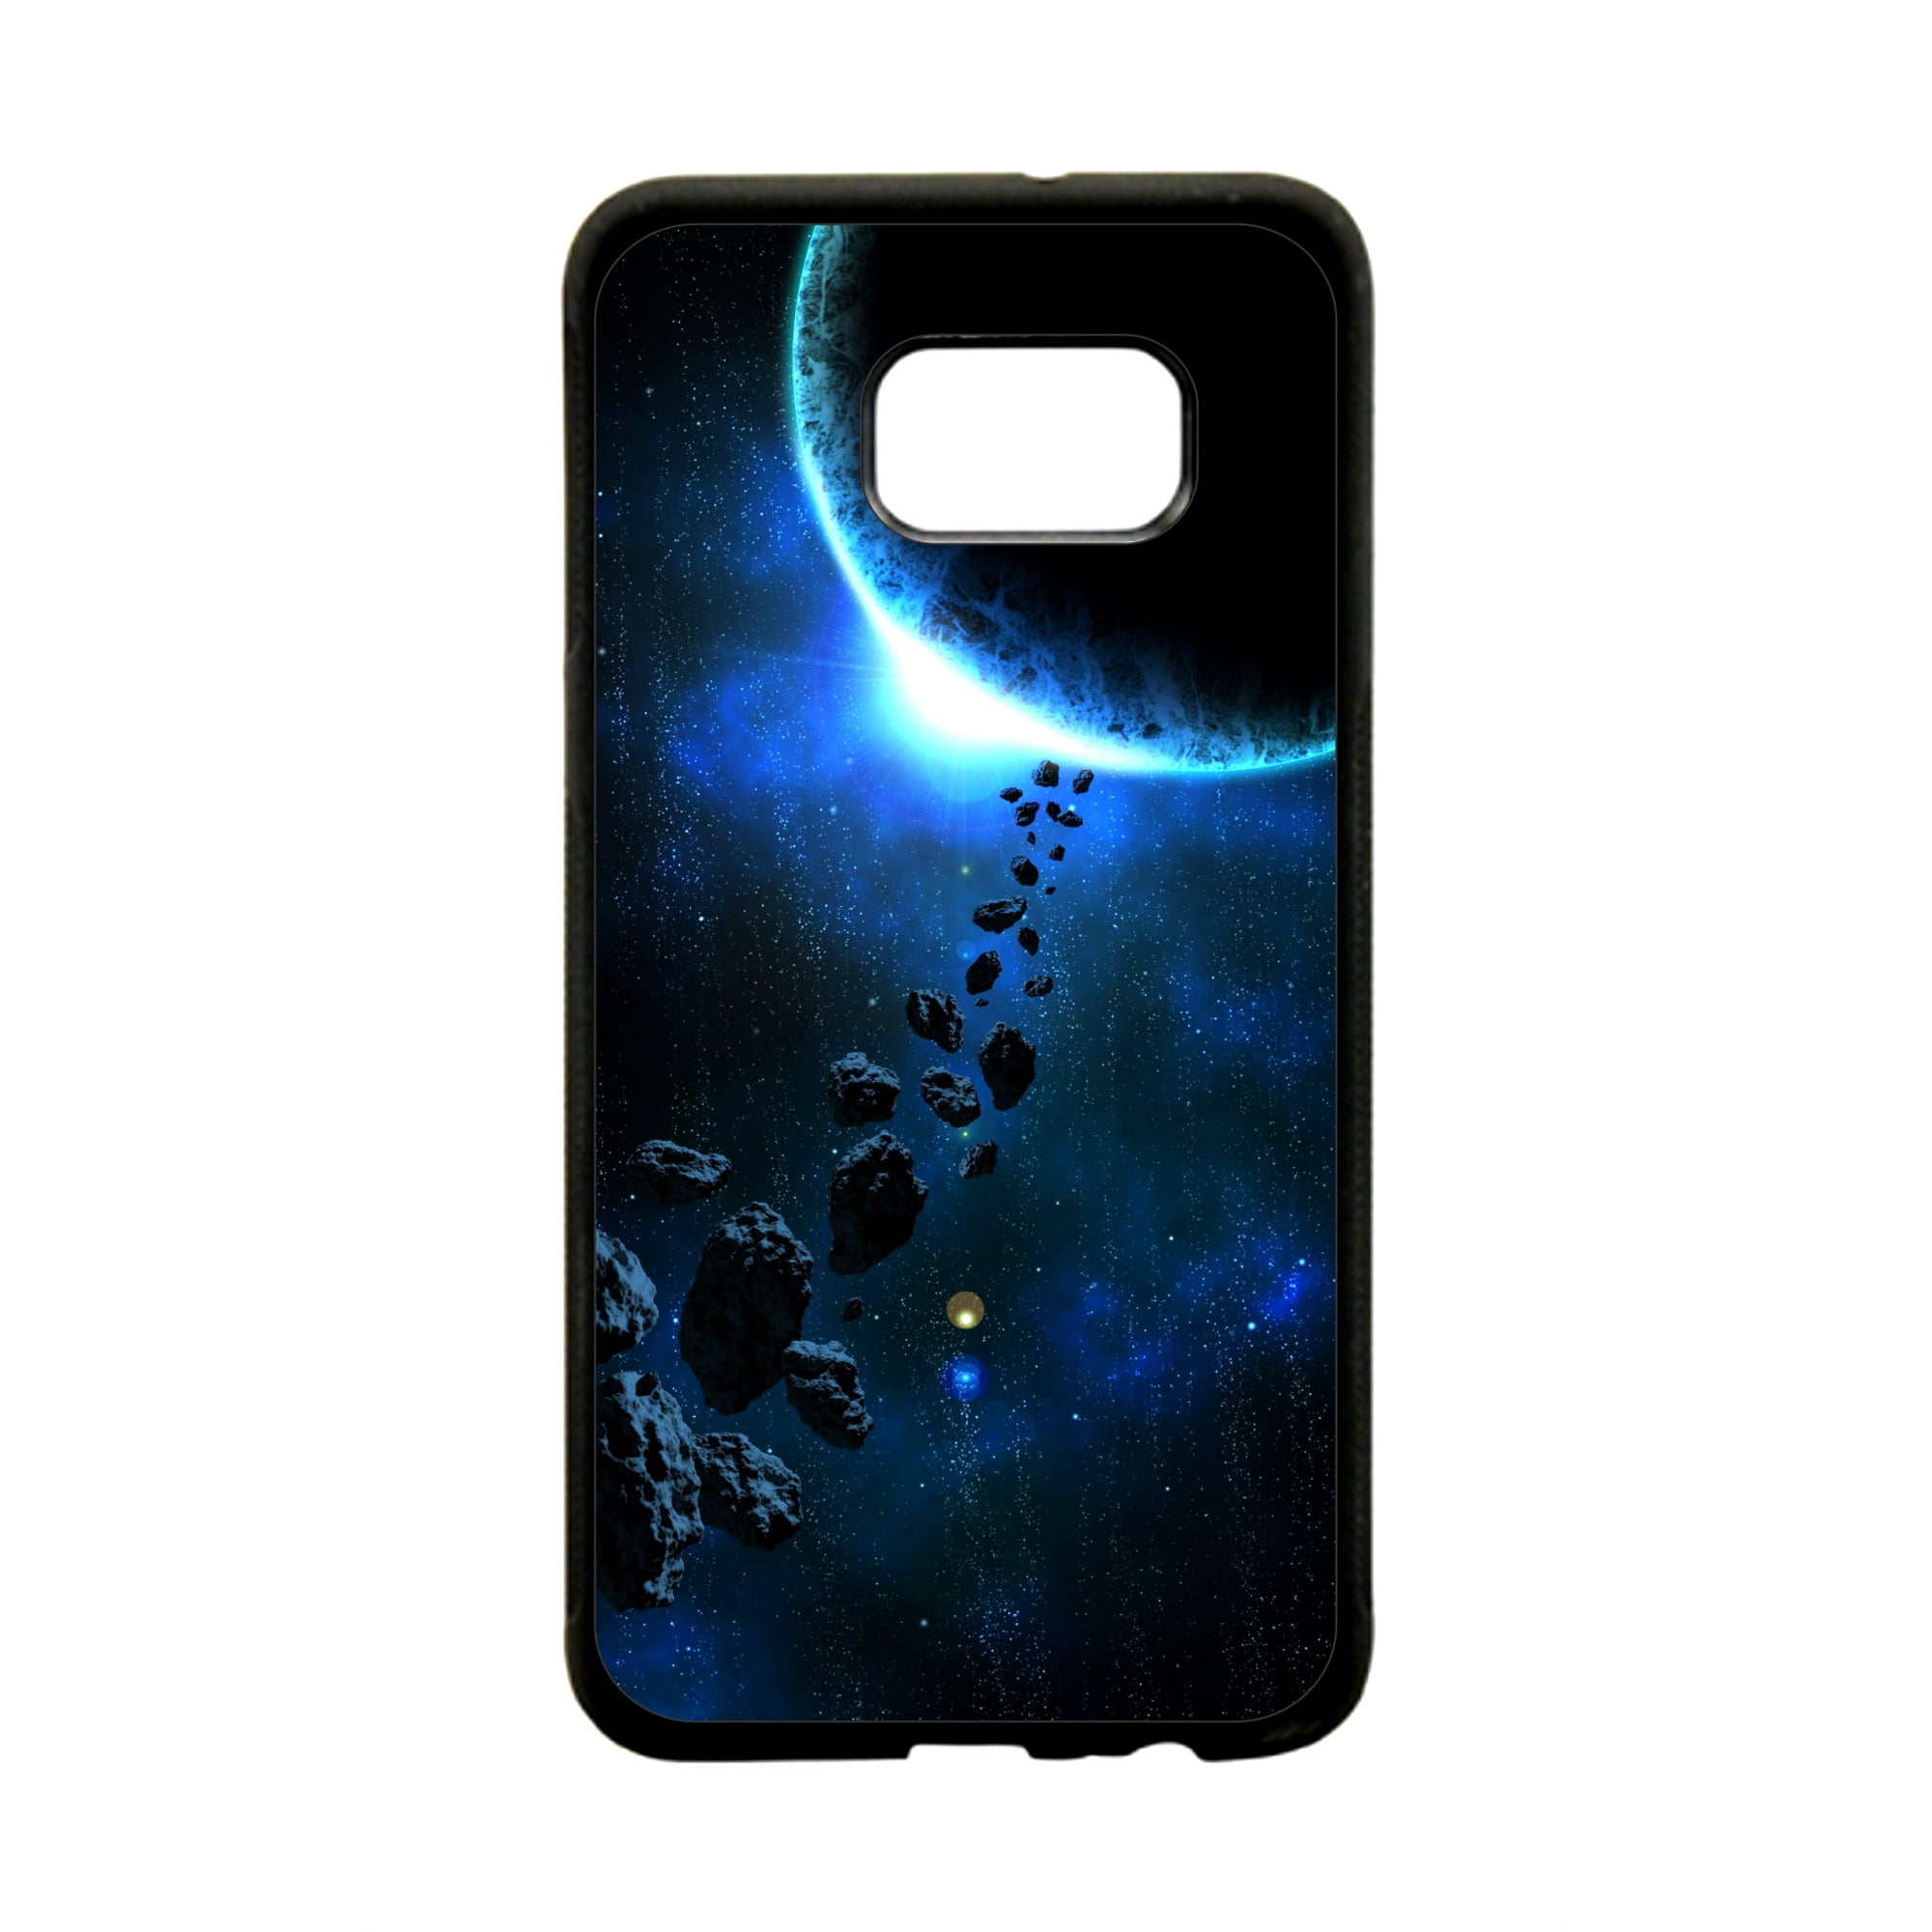 Outer Space Asteroids Design Black Rubber Thin Case for the Samsung Galaxy s8 Plus / s8+/ s8p - Samsung Galaxy s8 Plus - case - Walmart.com